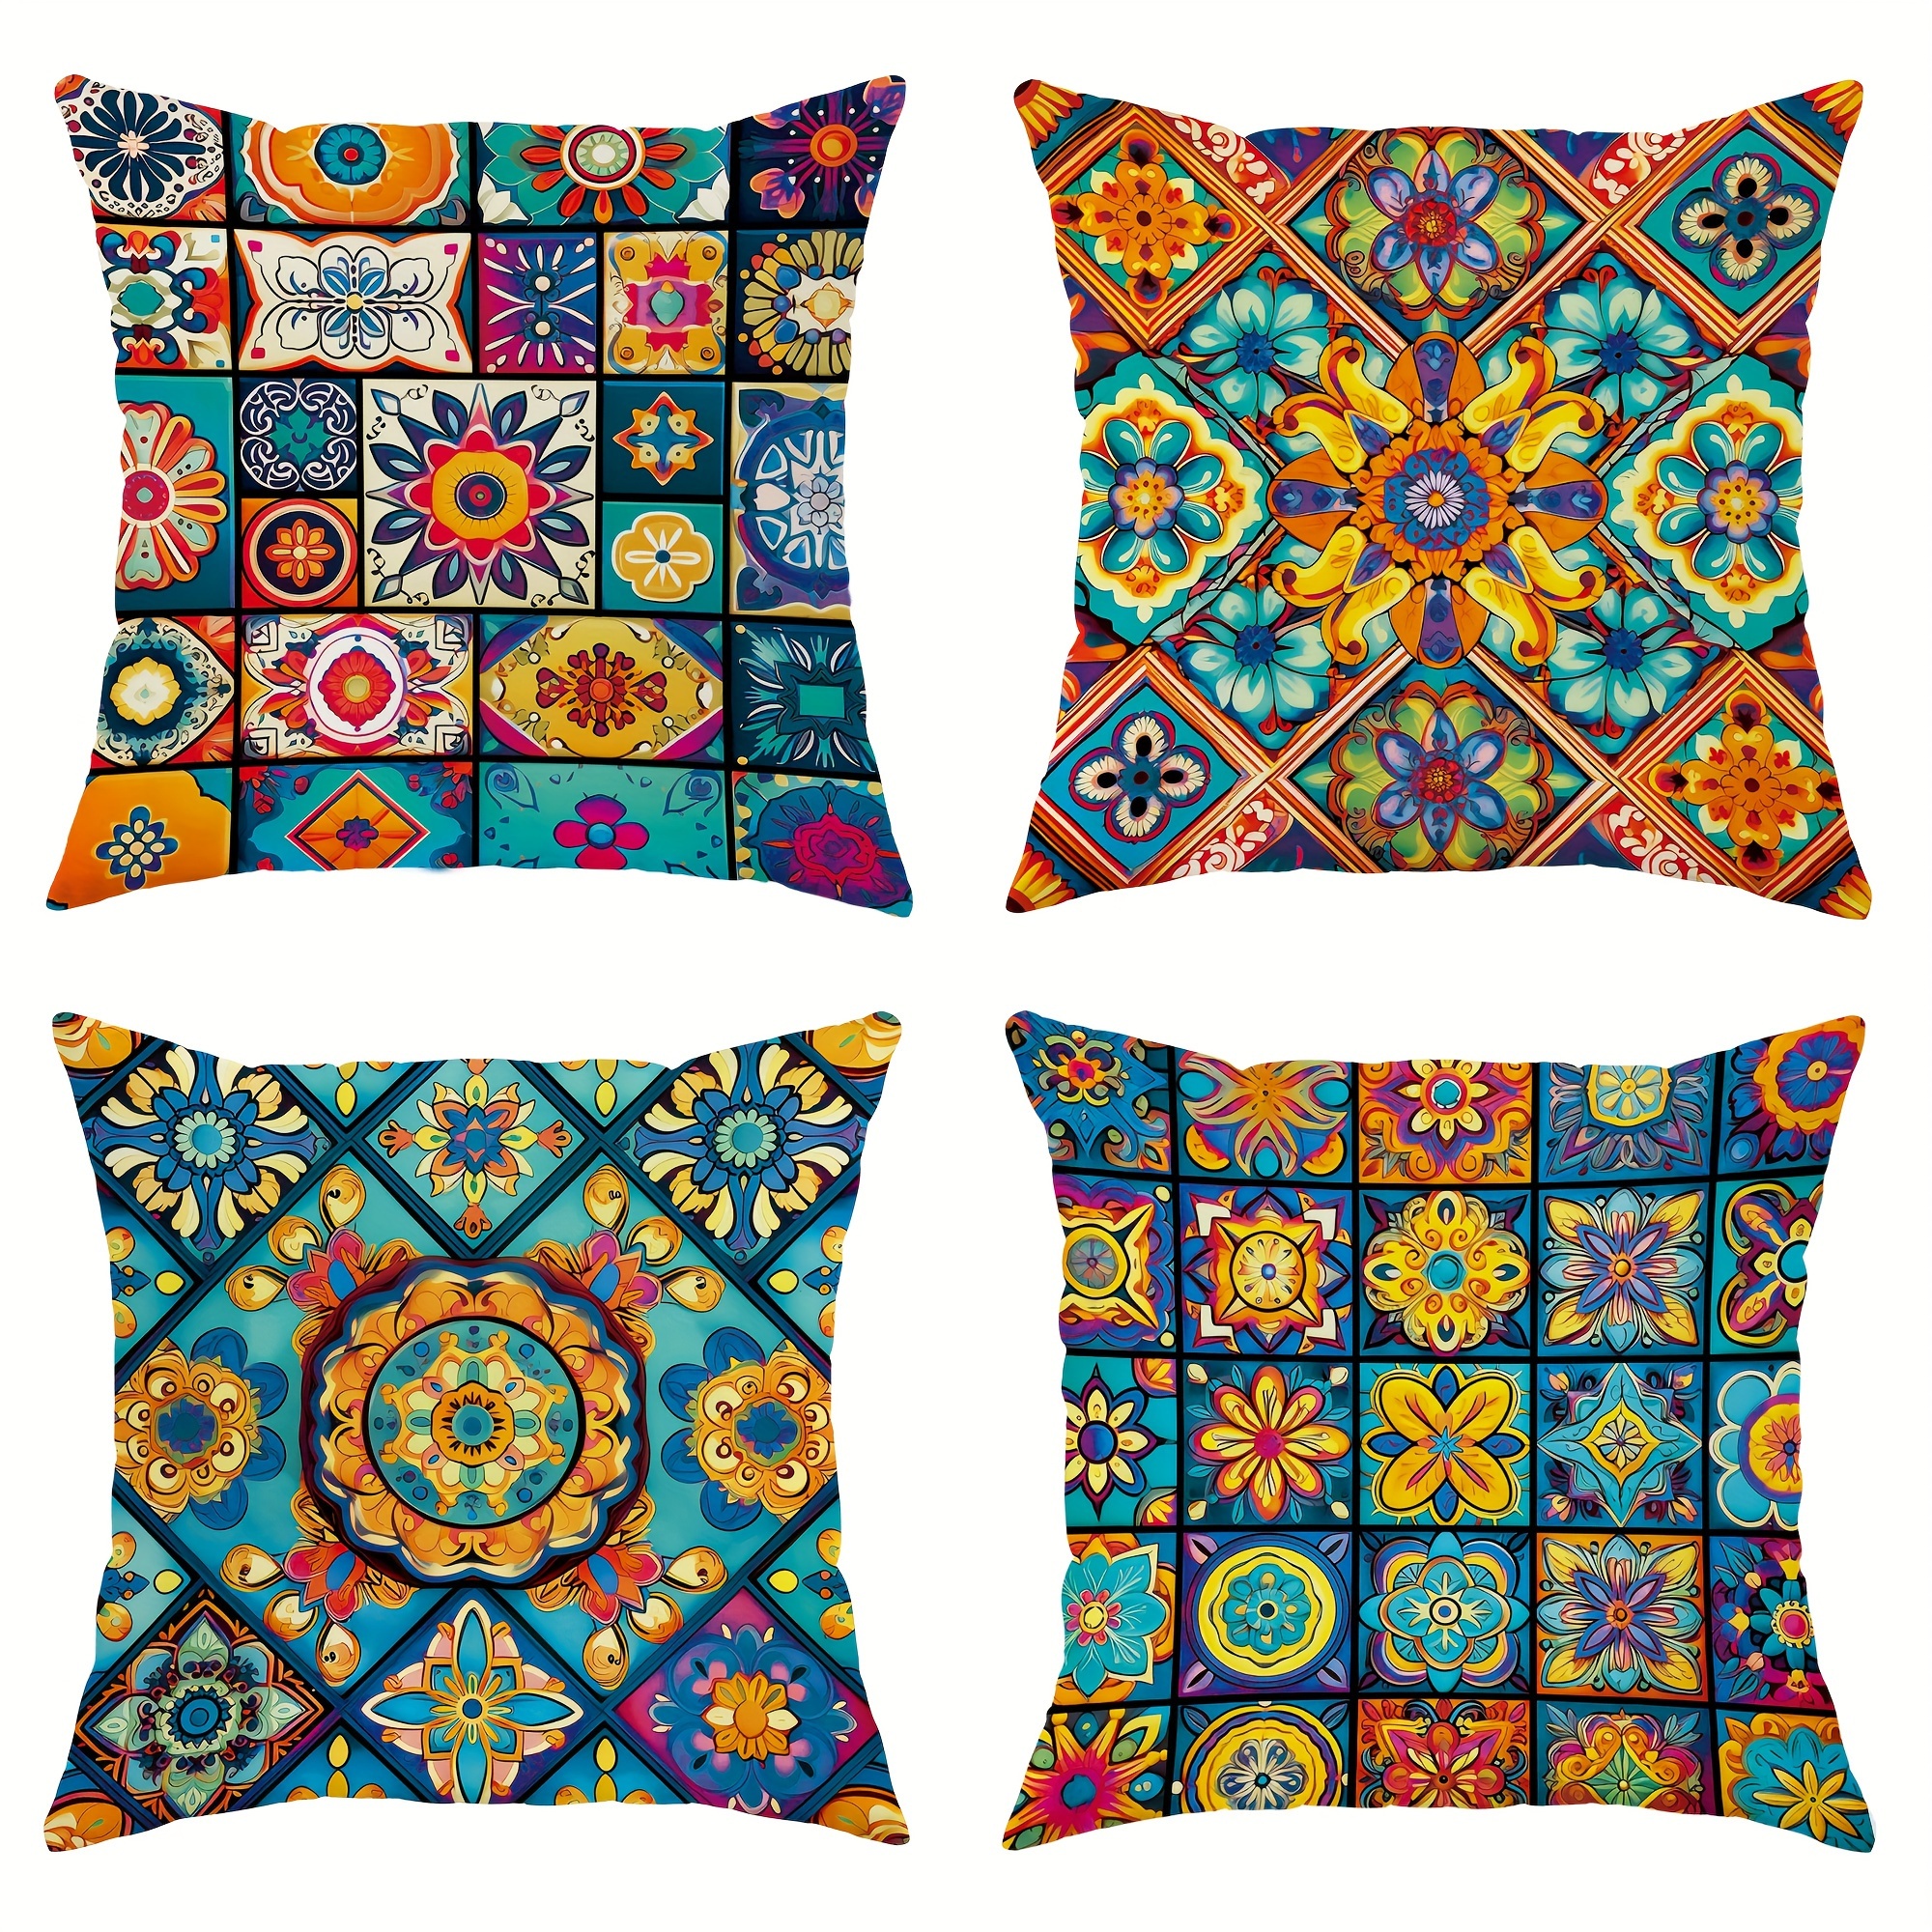 

4pcs, Velvet Throw Pillow Covers, Persian Bohemian Moroccan Floral Blue Lime Orange Throw Pillow Covers 18*18inch, For Living Room Bedroom Sofa Bed Decoration